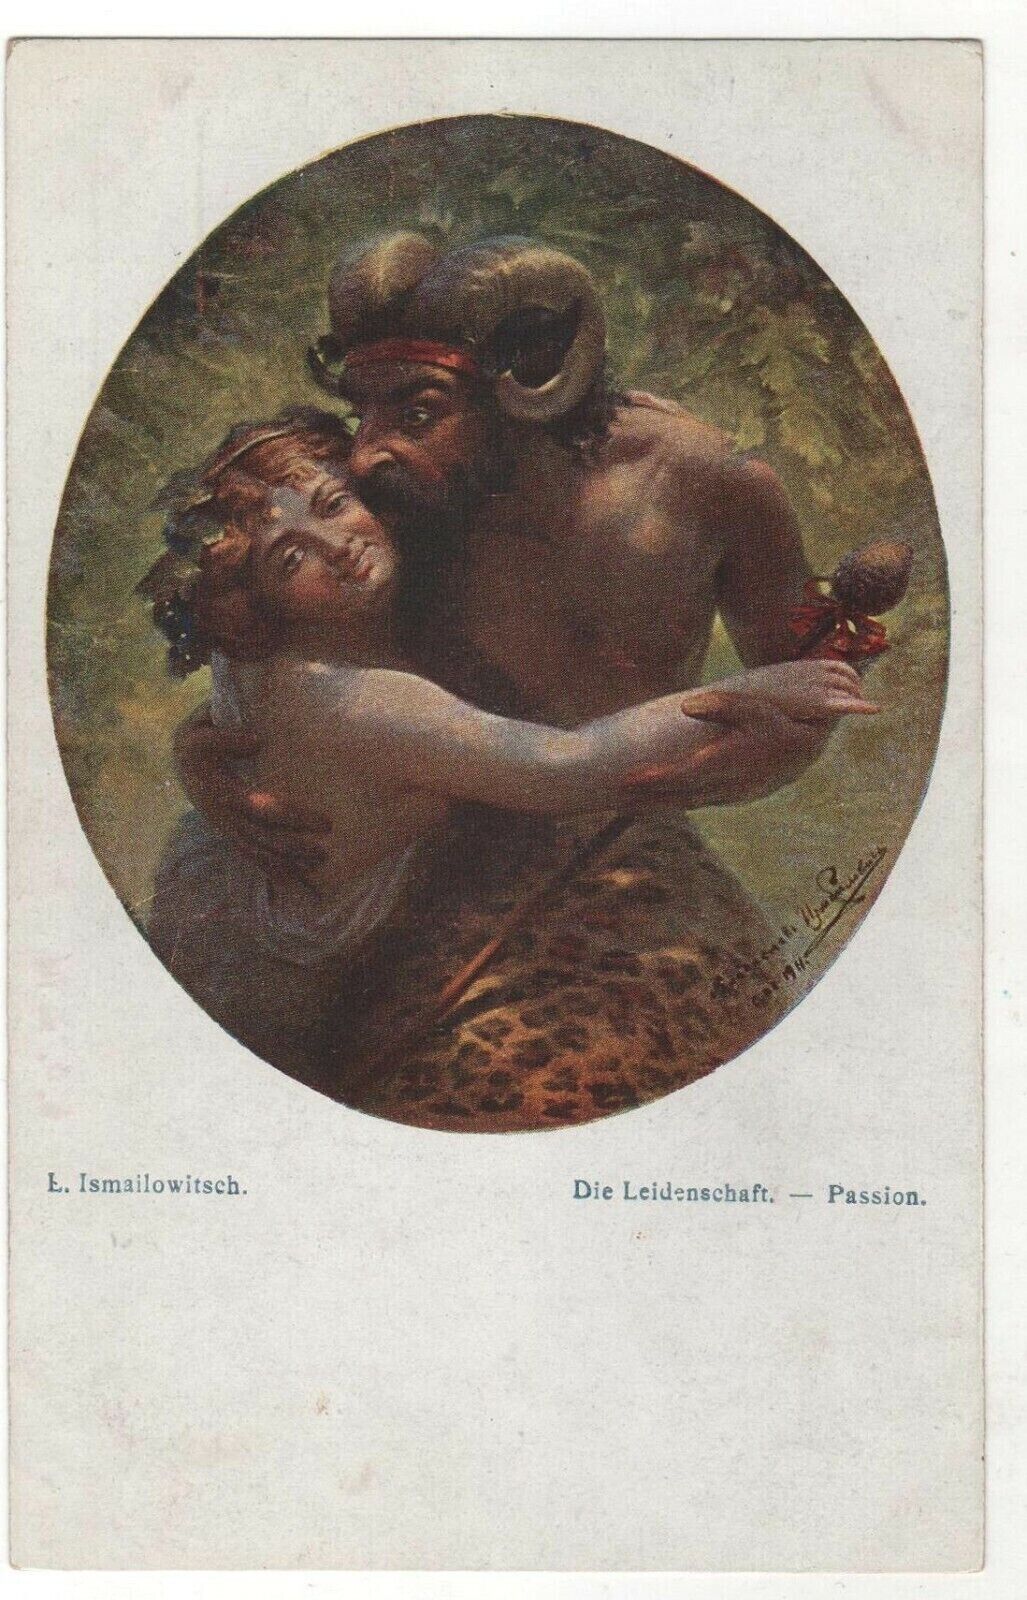 Antique Postcard FAUN mythology Passion ART by Ismailowitsch Old IMPERIAL Card